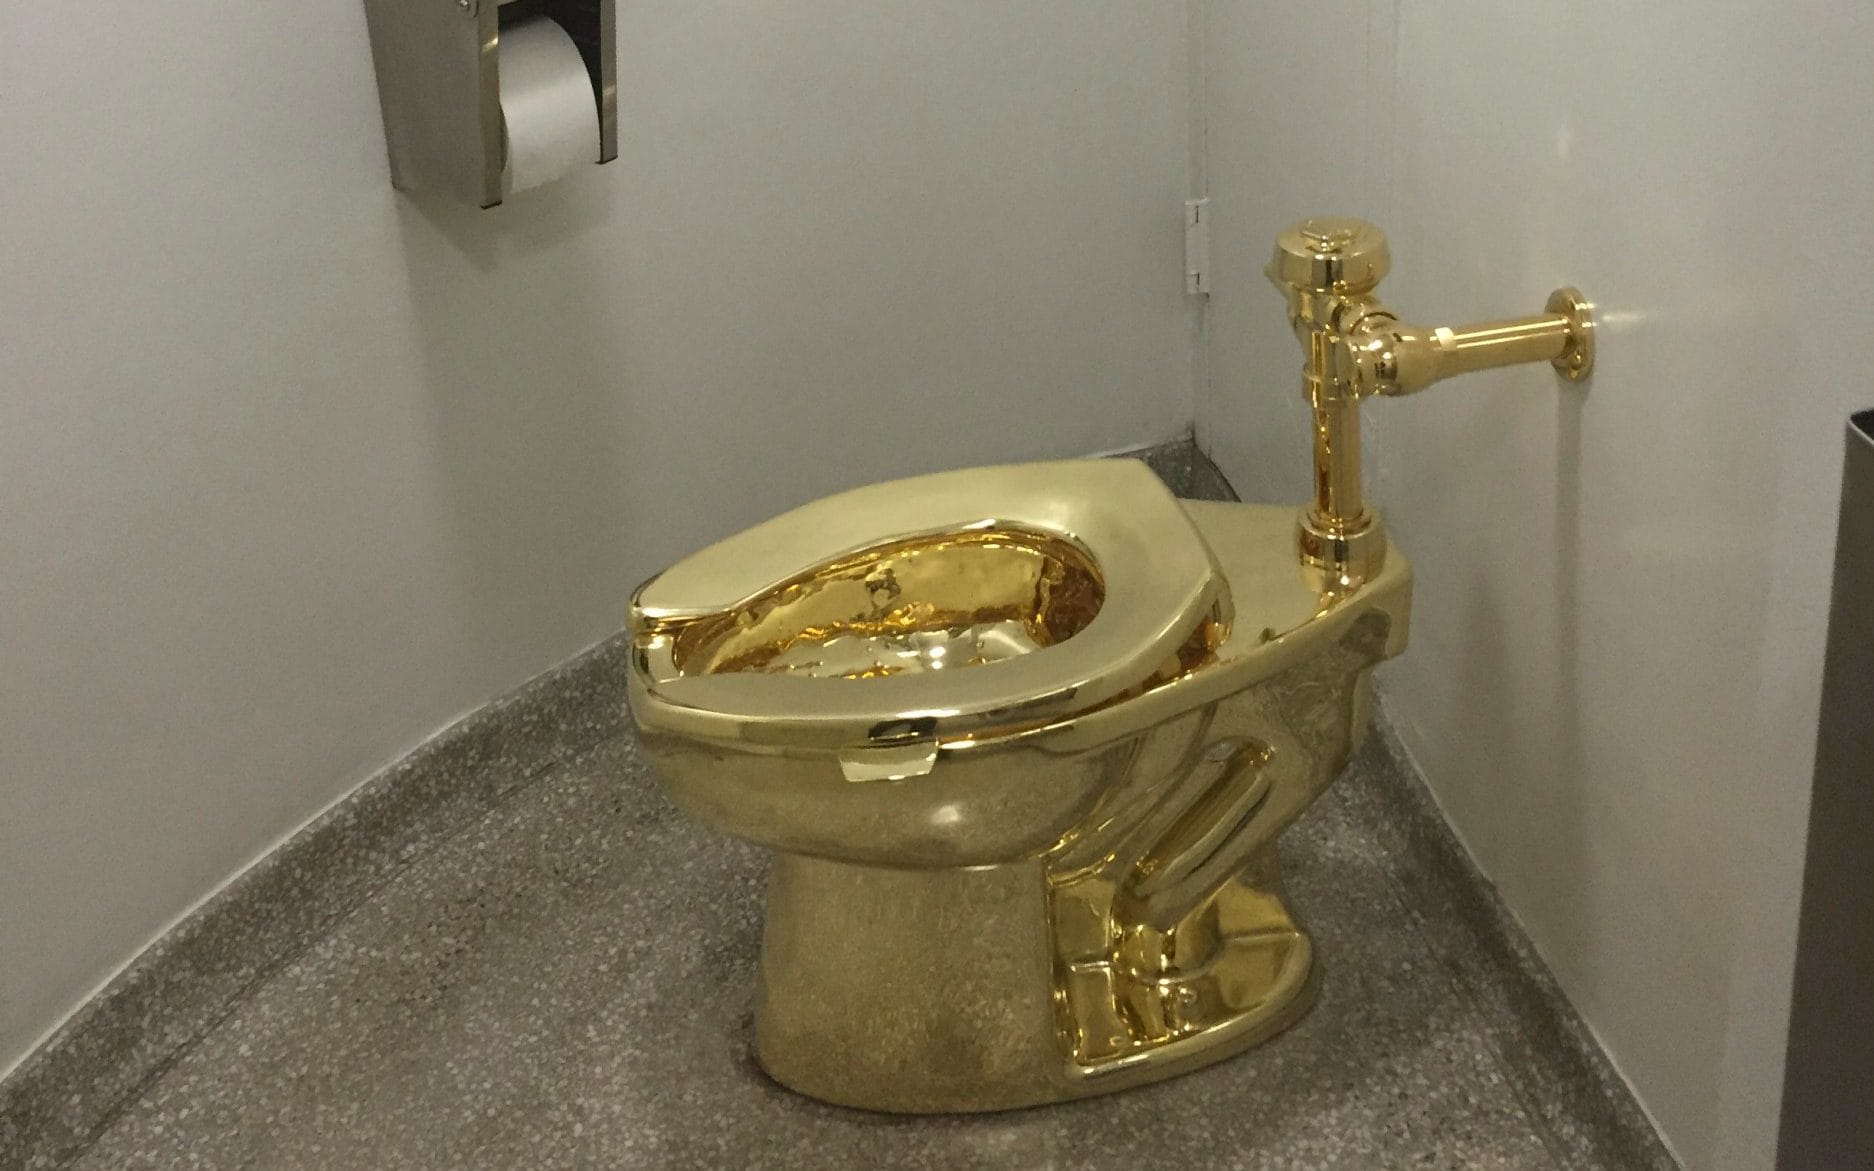 The White House requested a Van Gogh, but got a golden toilet instead